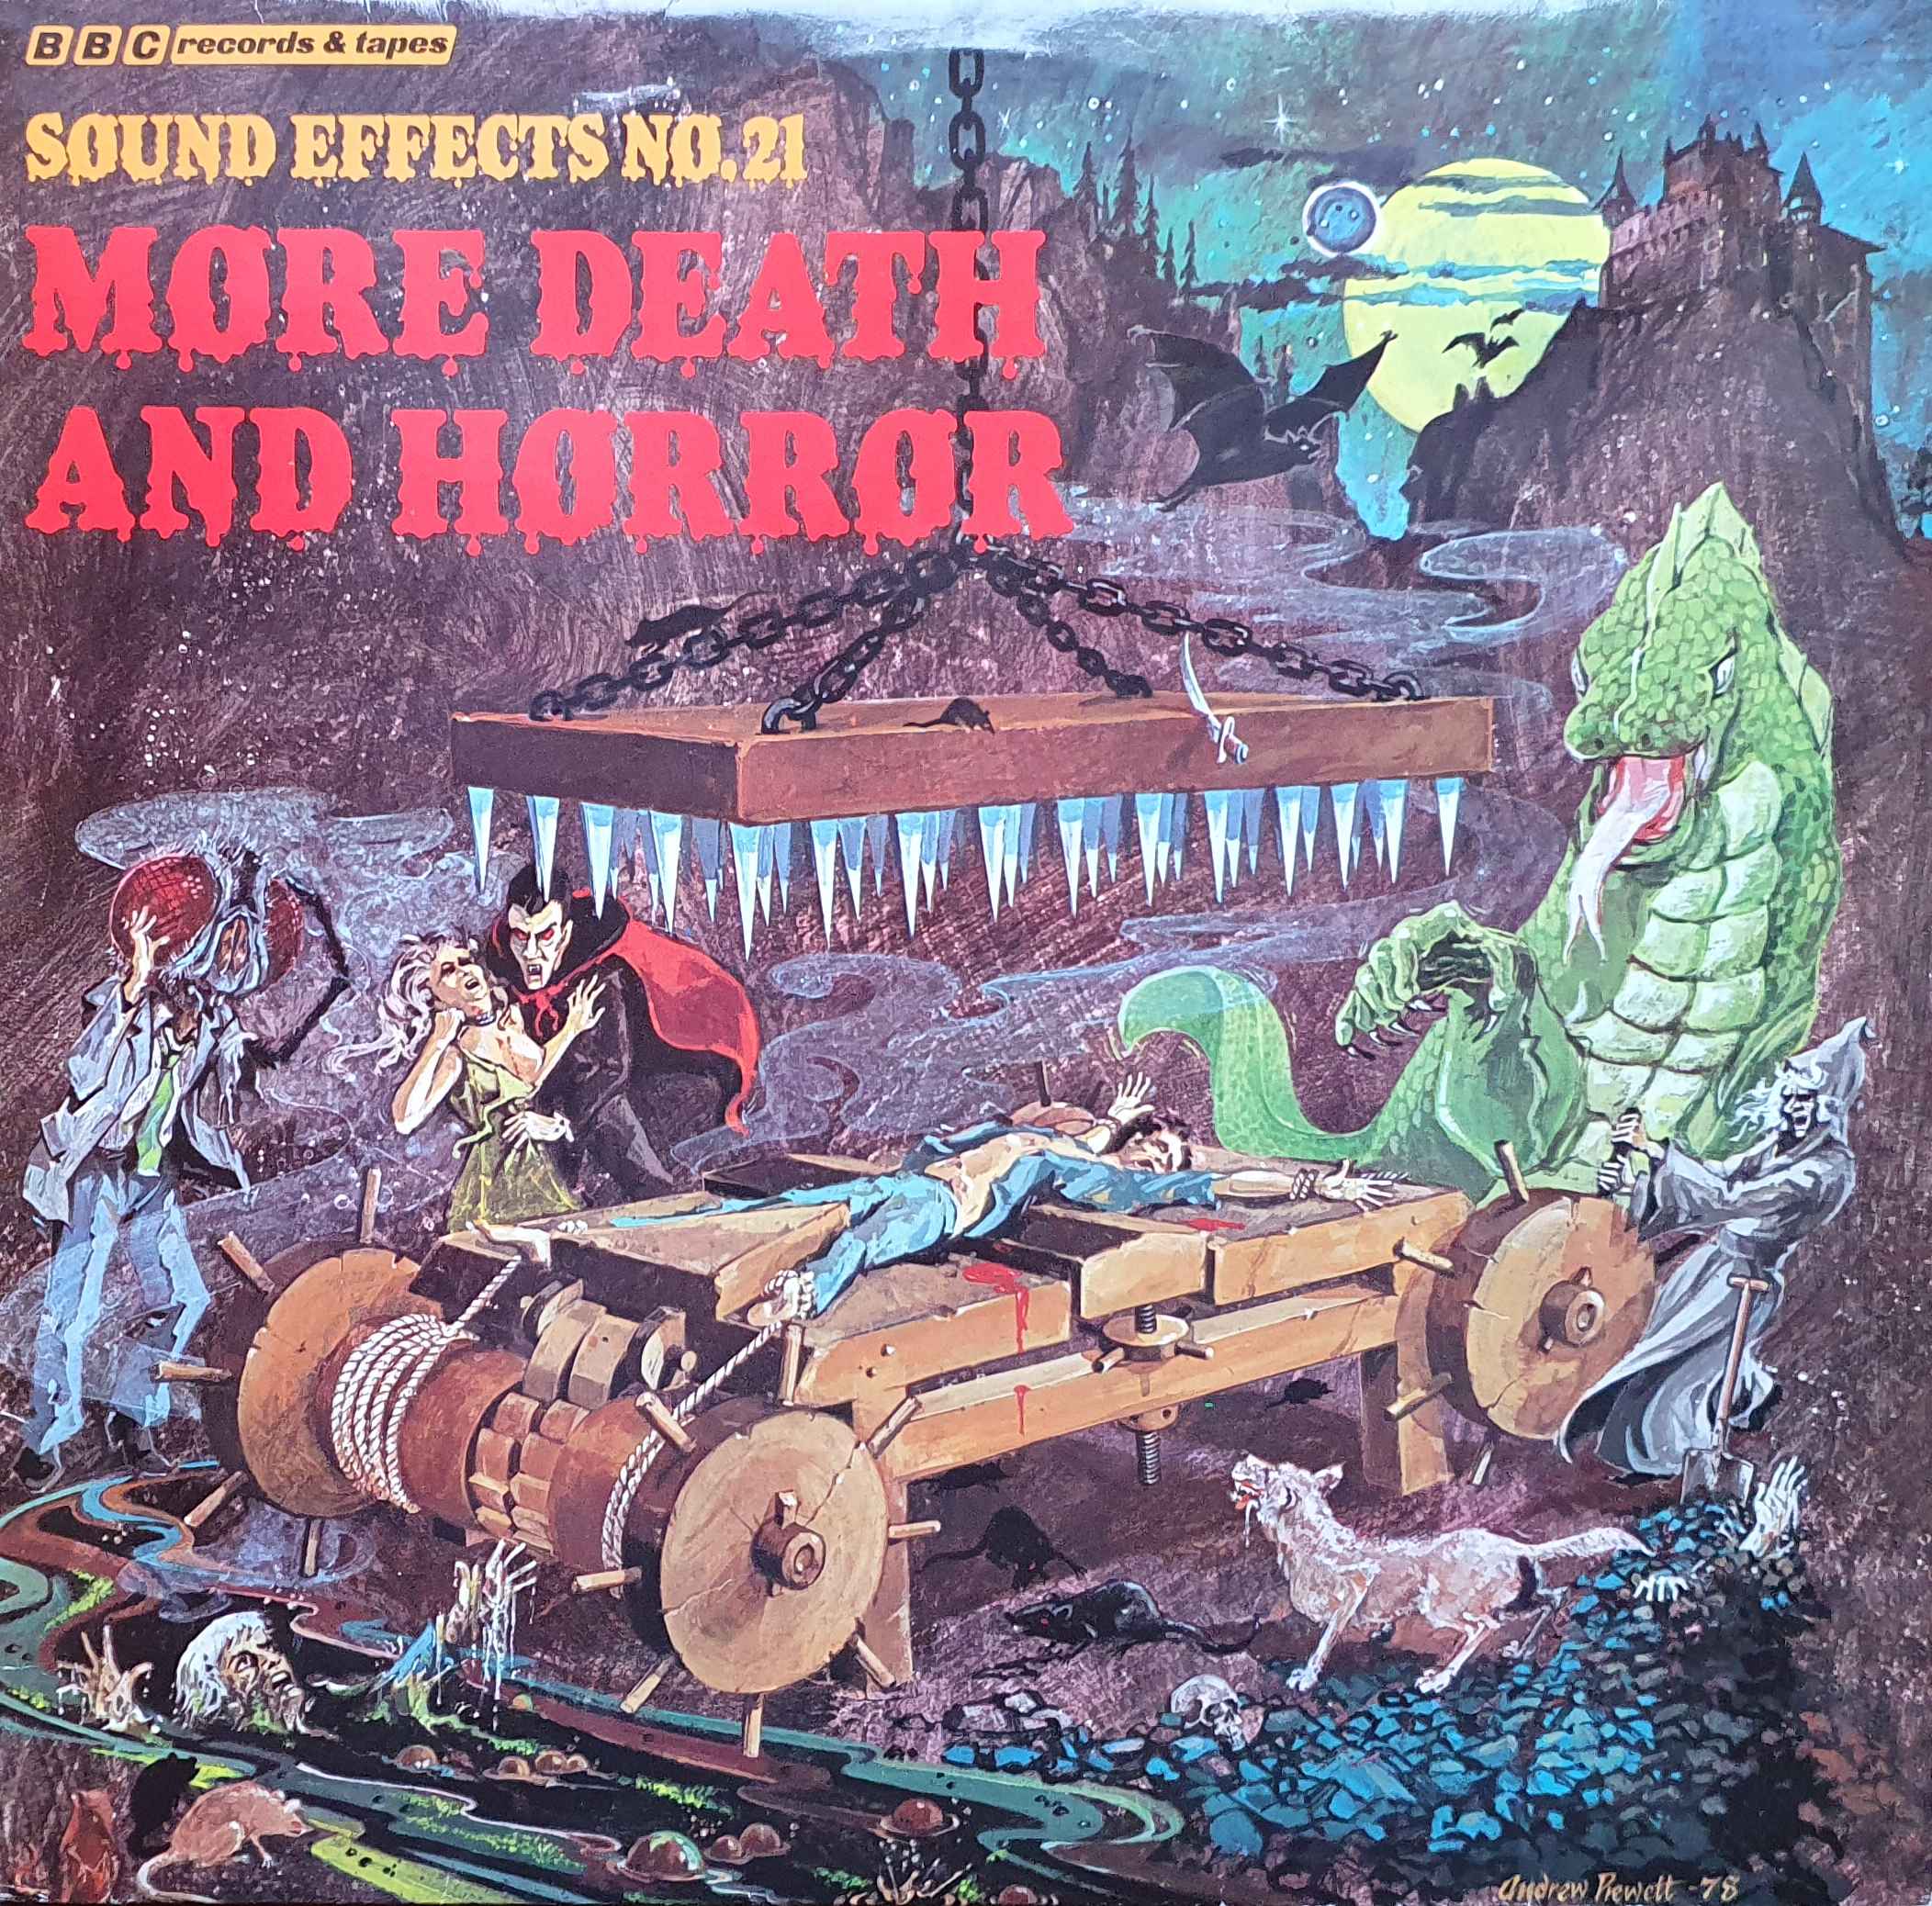 Picture of INT 128.006 Sound effects no. 21 - More death and horror (German import) by artist Mike Harding / Peter Harwood from the BBC albums - Records and Tapes library